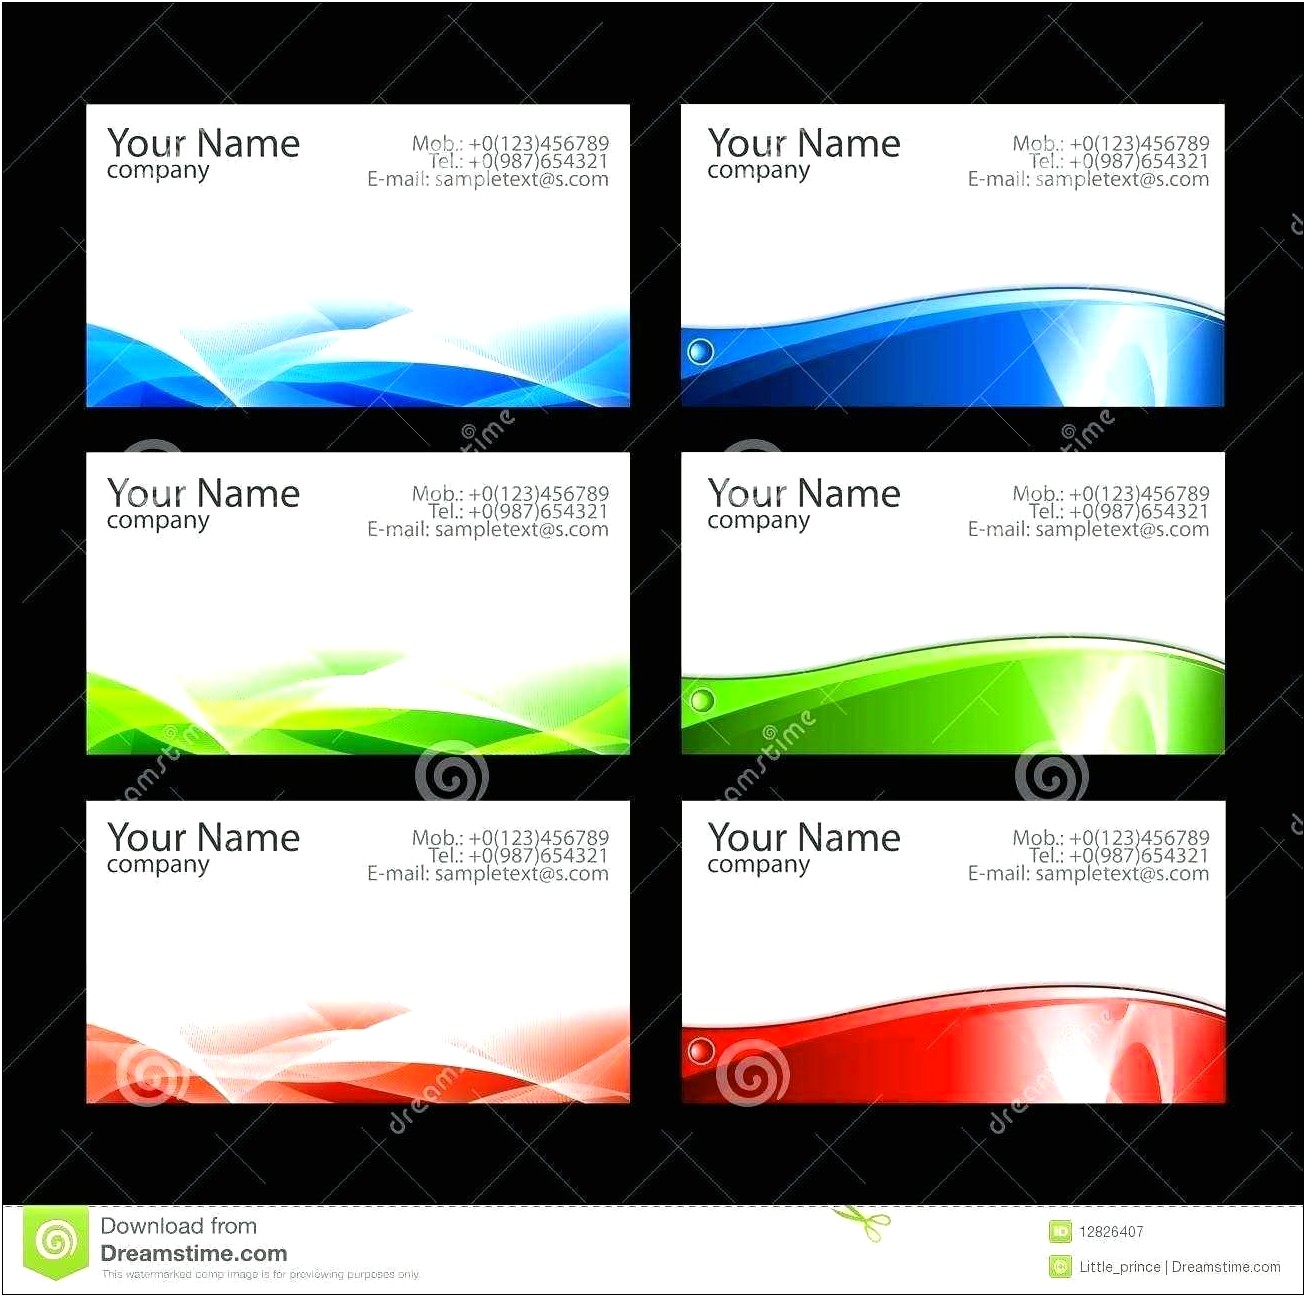 Free Blank Business Card Templates For Word 2007